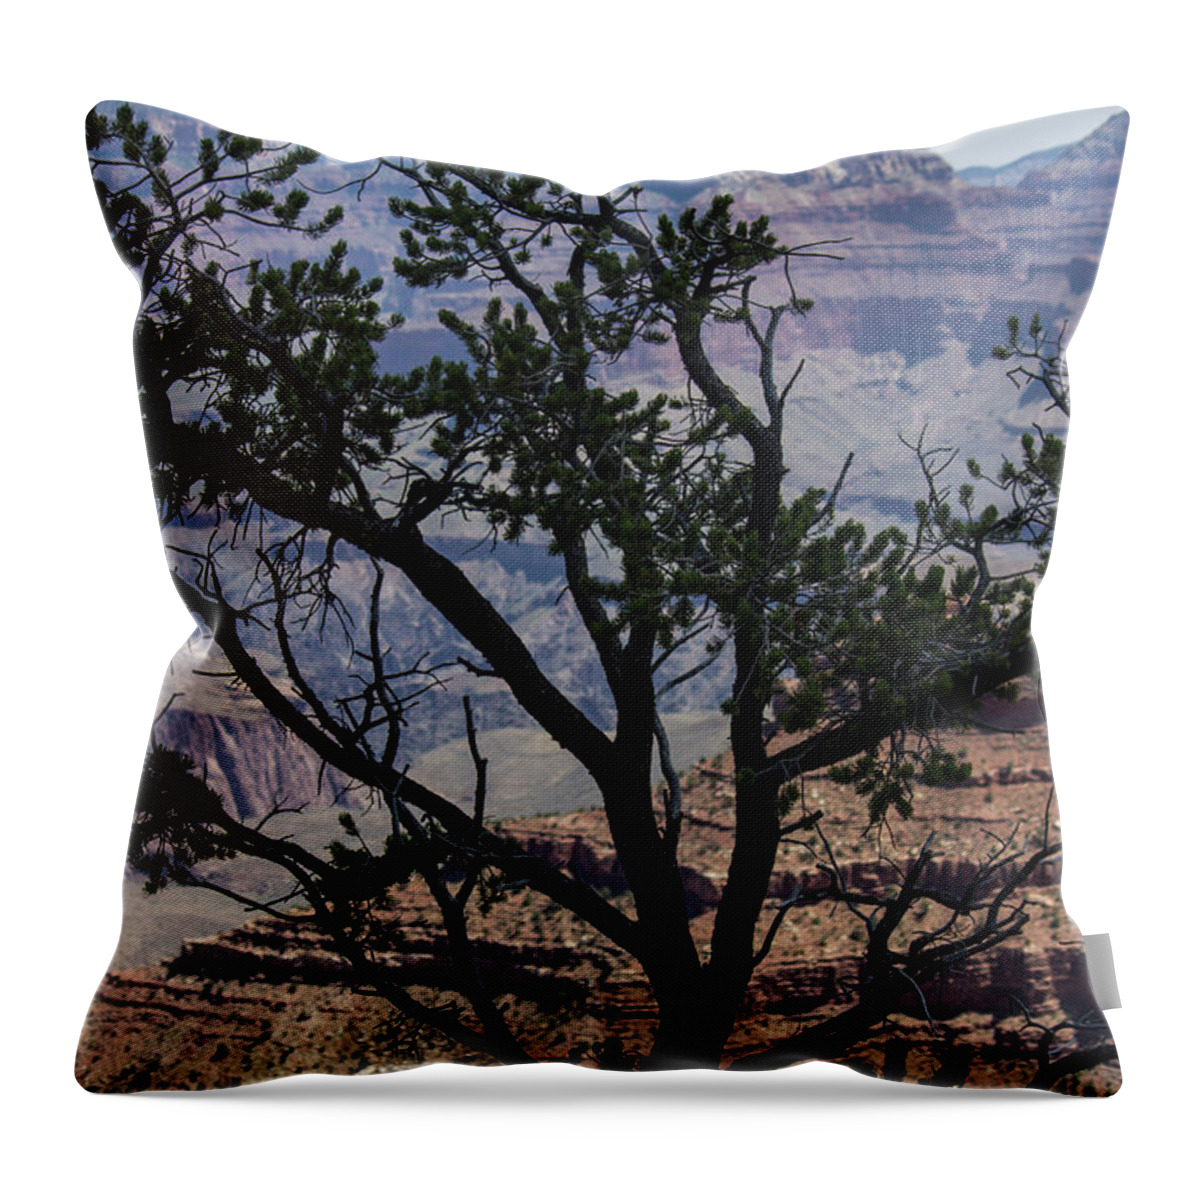 Grand Canyon Throw Pillow featuring the photograph Tree View Grand Canyon by Roberta Byram